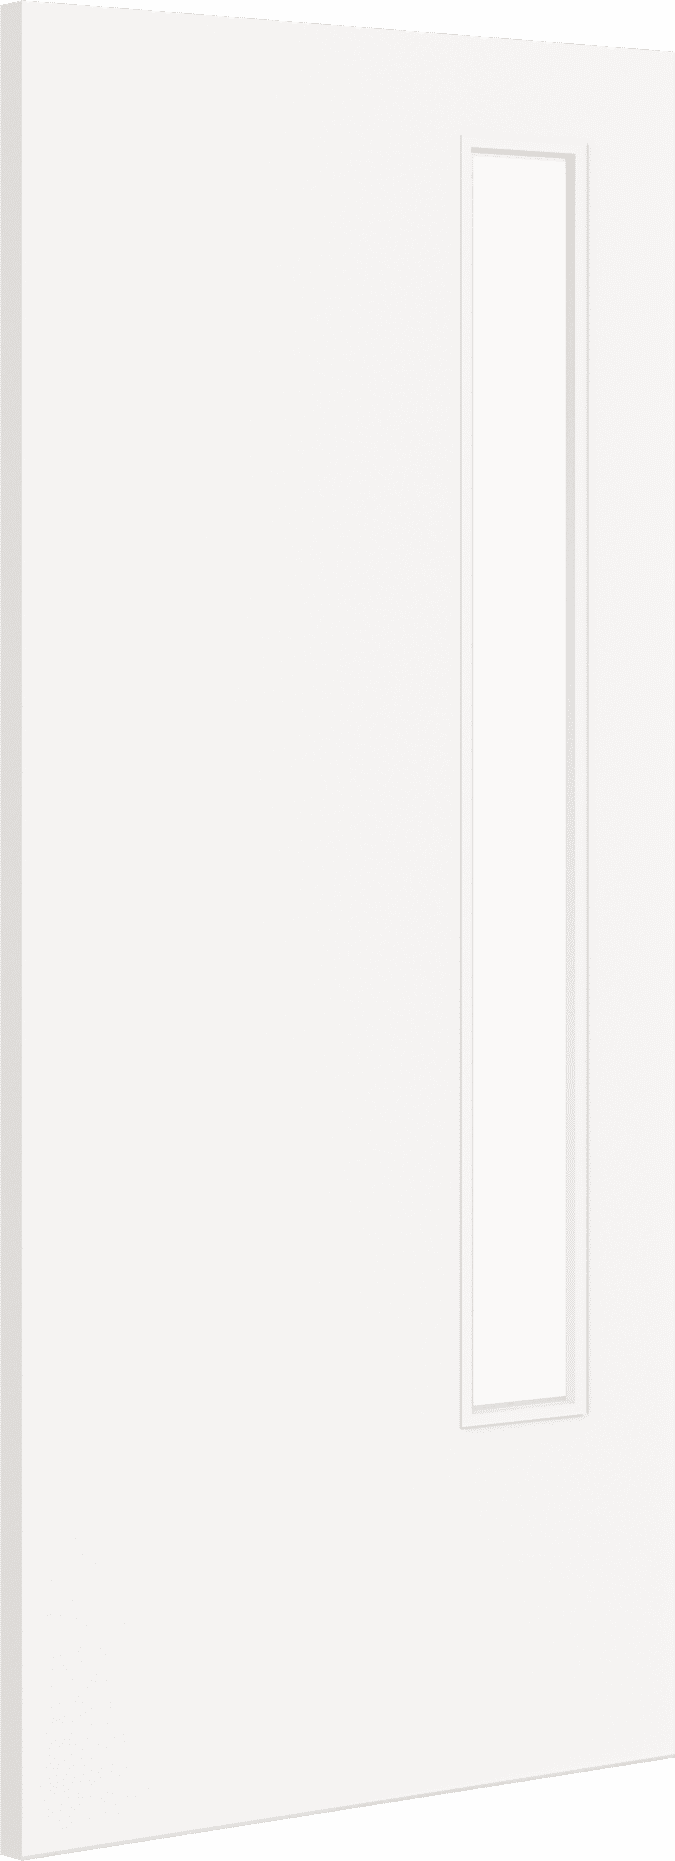 1981mm x 838mm x 44mm (33") Architectural Paint Grade White 13 Clear Glazed Fire Door Blank